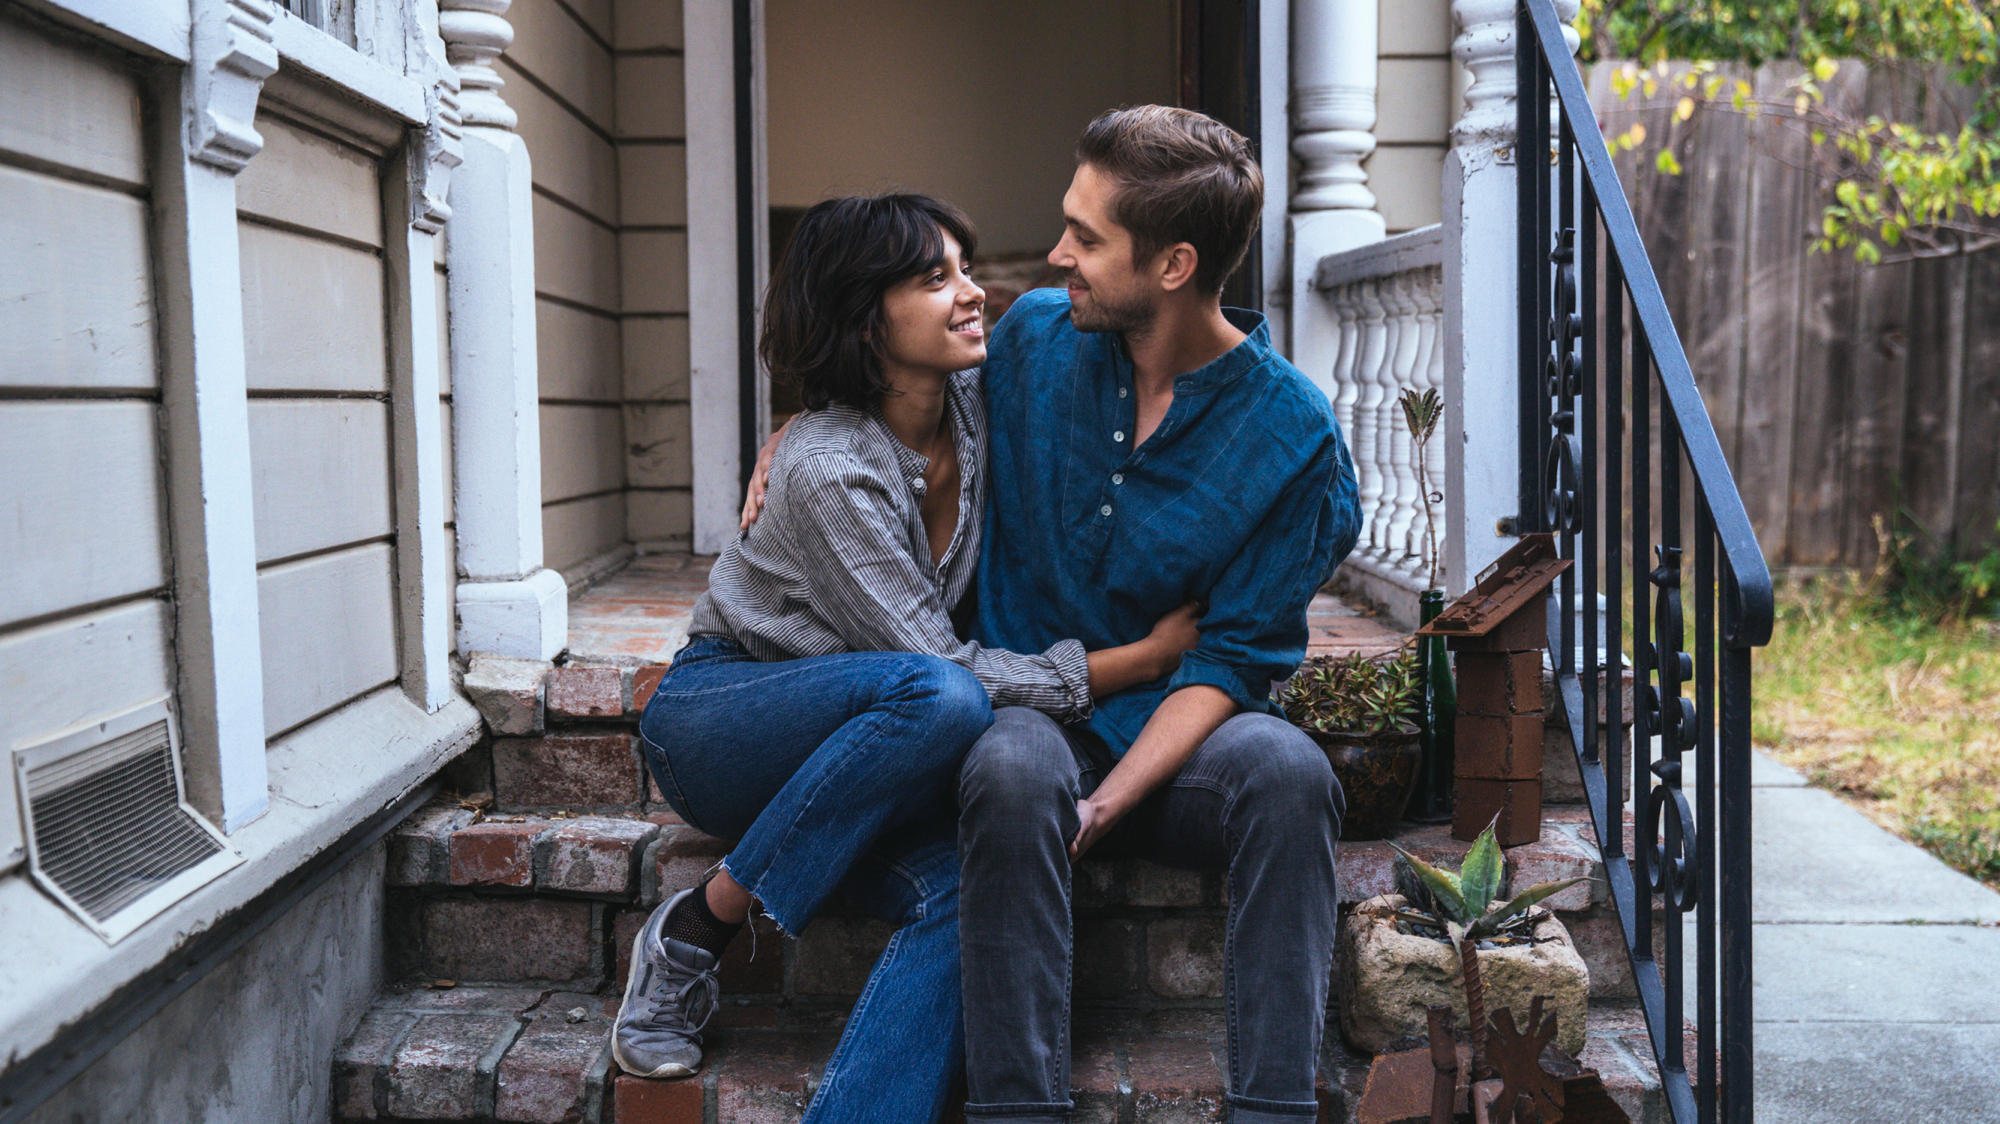 Couple on a porch in one of the hottest neighborhoods of 2019